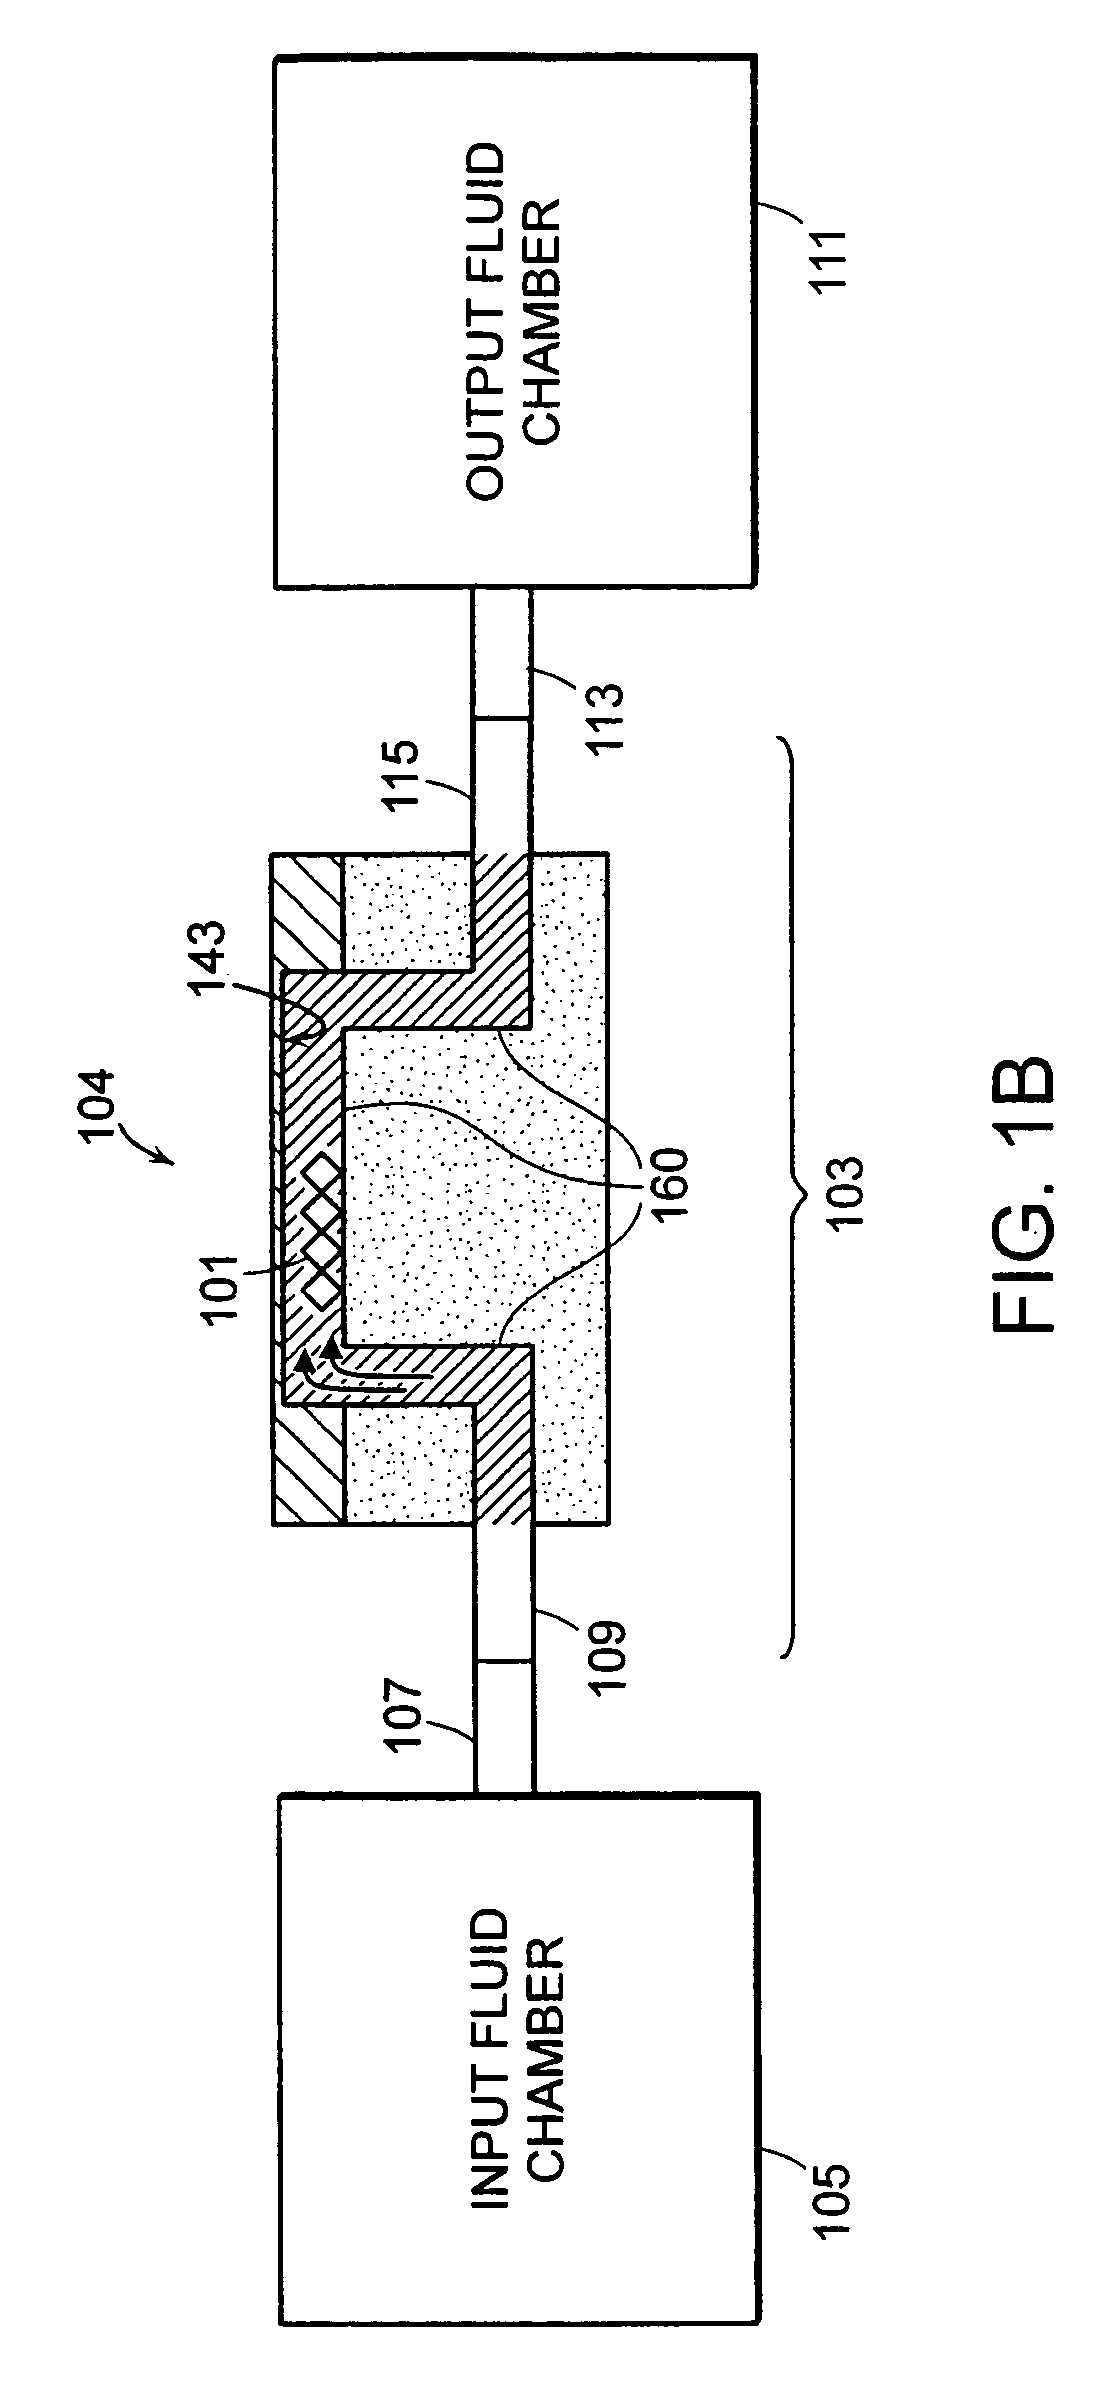 Method and apparatus for therapeutic drug monitoring using an acoustic device